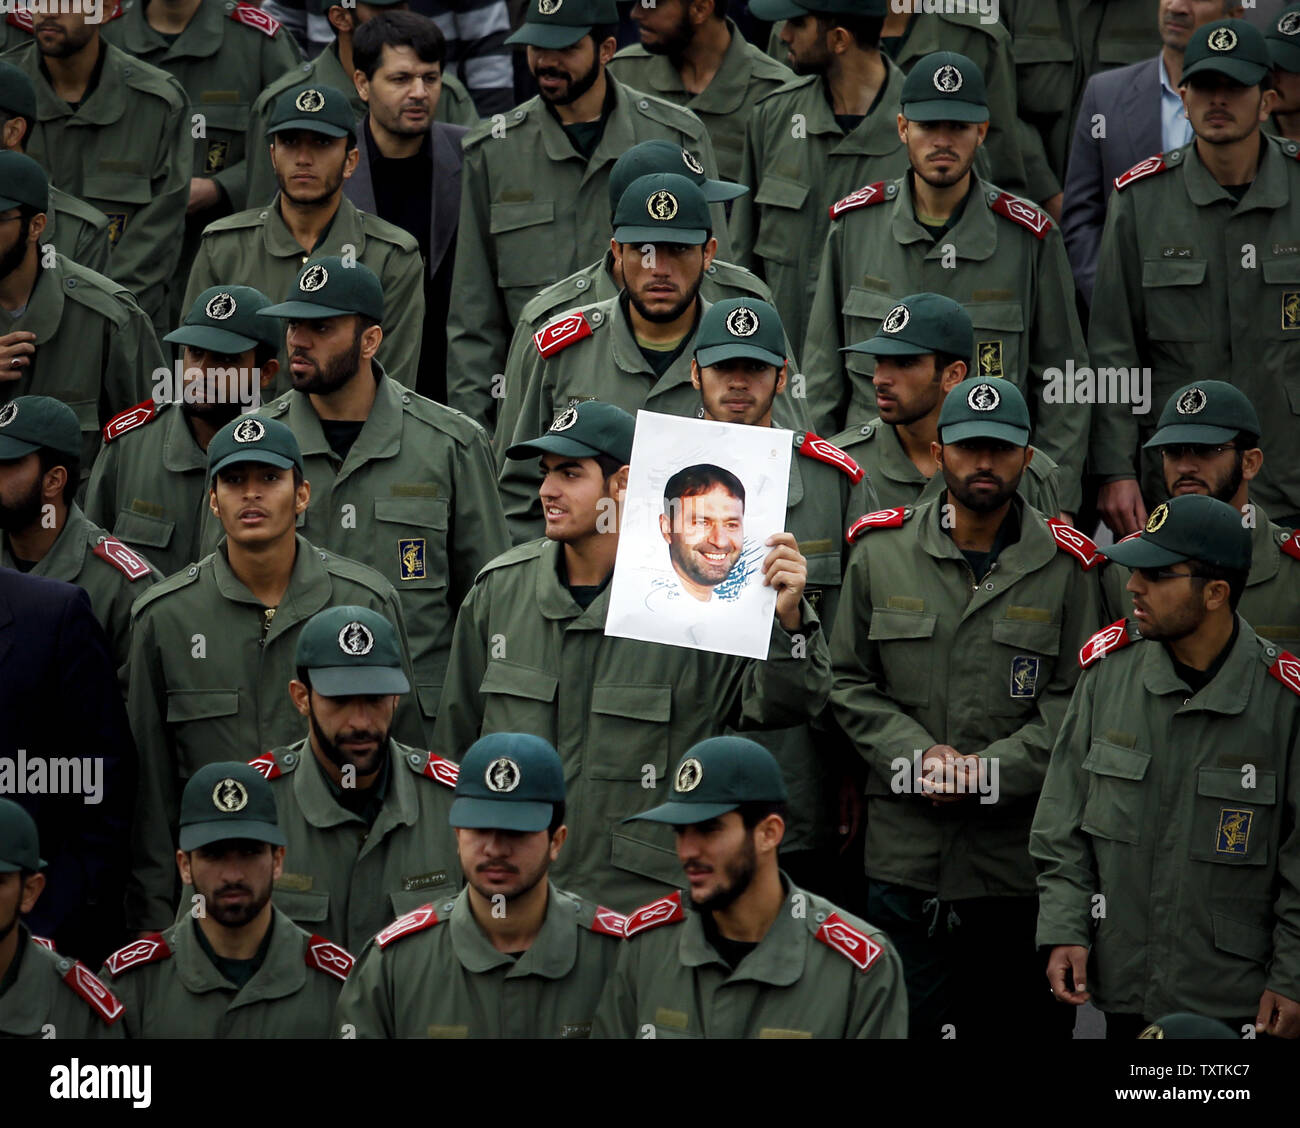 Iranians mourn for Revolutionary Guard soldiers who killed during explosion in Tehran, Iran, November 14, 2011.The explosion happened on on Saturday when  a munitions depot caught fire at the IRGC base in Bidgeneh village. The Total of 17 IRGC forces, including Maj. Gen. Hassan Tehrani Moqaddam, director of the Guard's Jihad Self-Sufficiency Organization were killed and 16 others were seriously injured. Tehran, Iran , November 14, 2011.     UPI/Maryam Rahmanian. Stock Photo